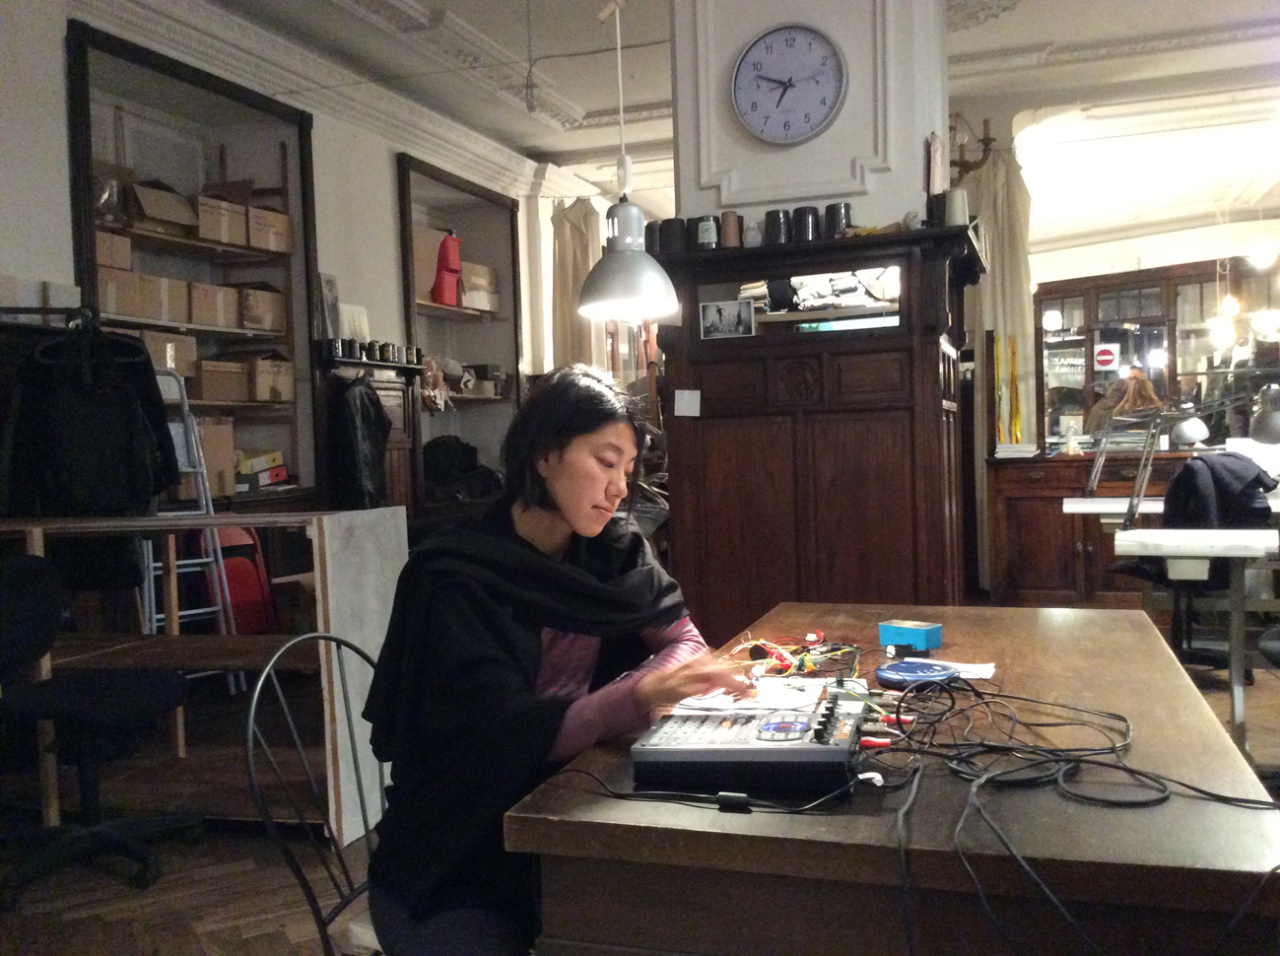 A young woman is sitting at a table in front of some technical devices. She's creating electronic music.